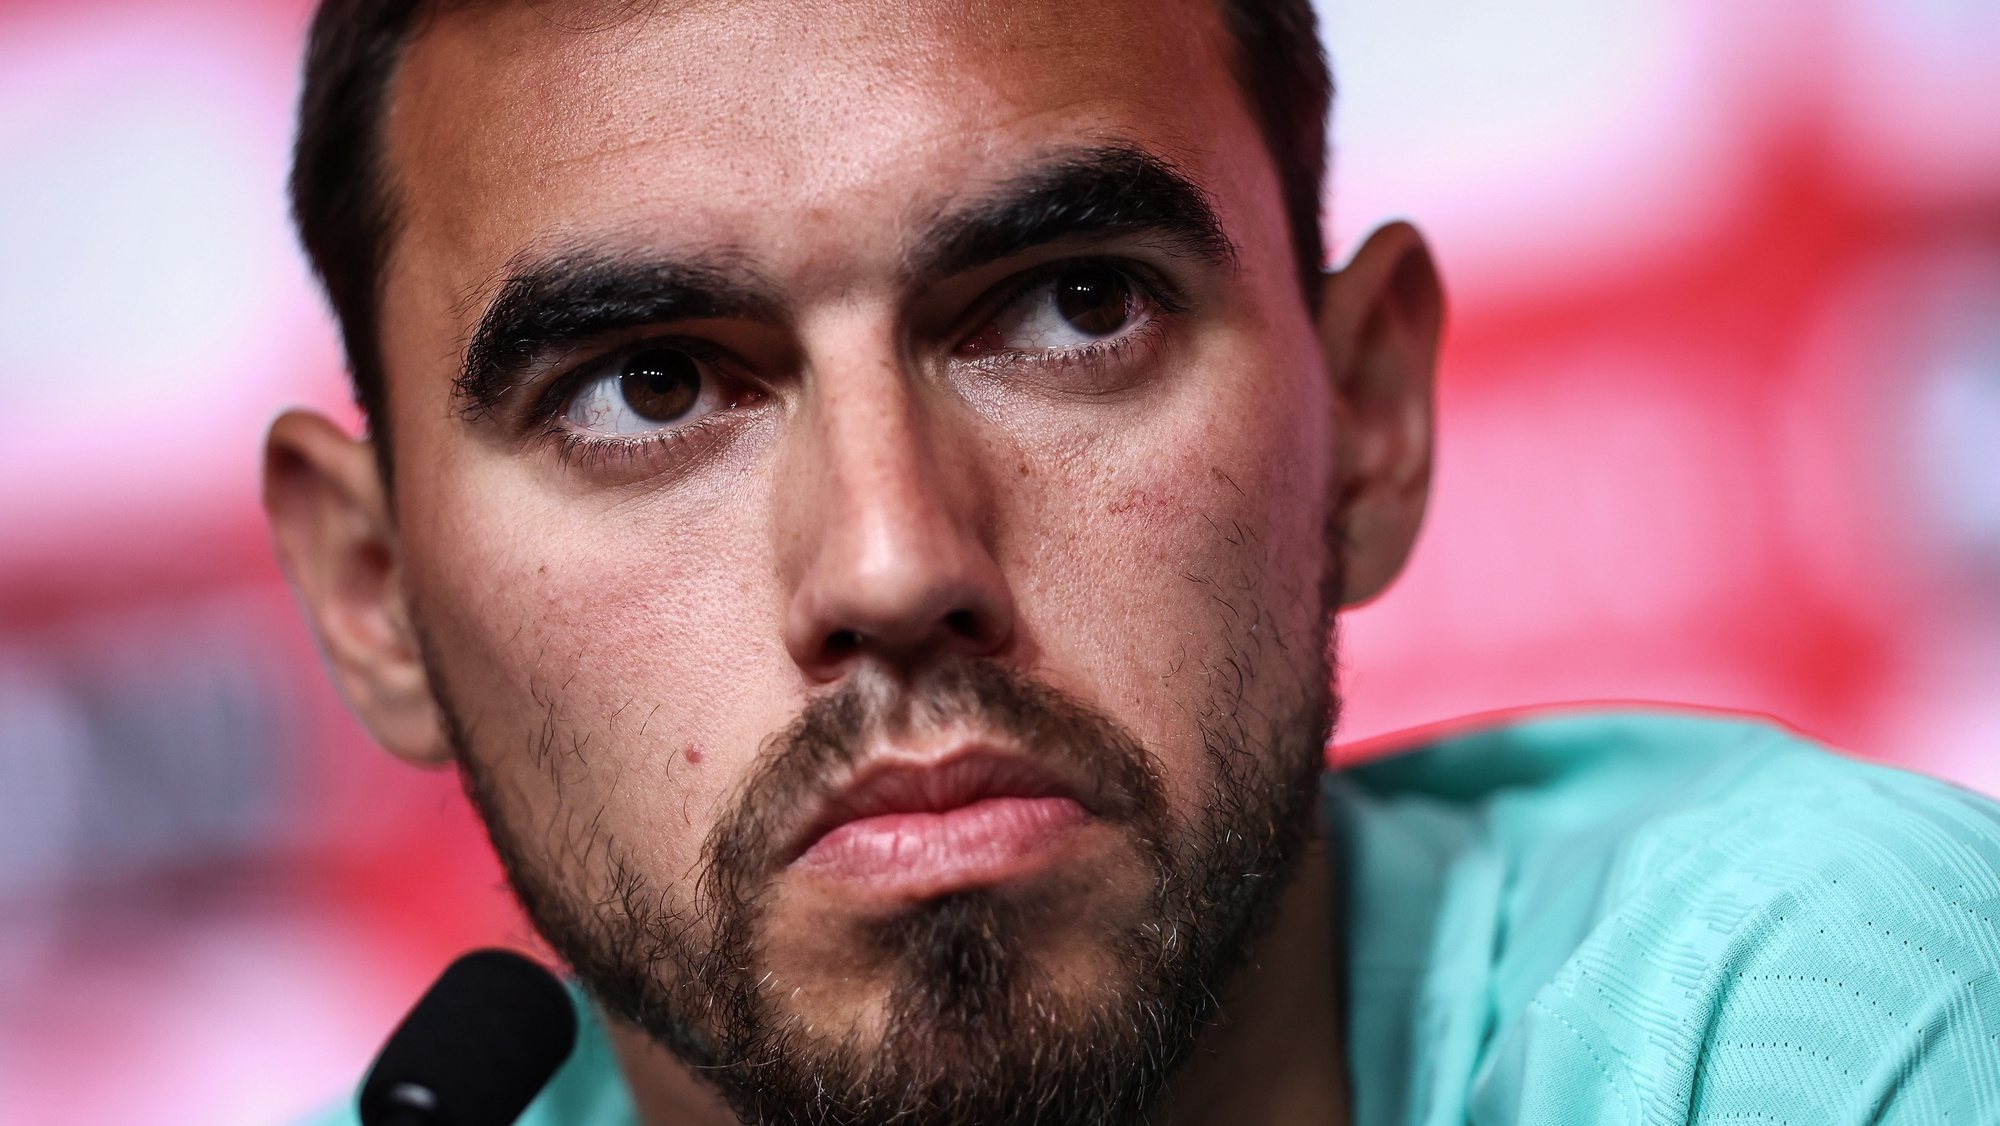 epa09981519 Portugal soccer team player Ricardo Horta talks during a press conference at Cidade do Futebol in Oeiras, Portugal, 28 May 2022. Portugal will play against Spain, Czech Republic and Switzerland for the upcoming UEFA Nations League in June.  EPA/RODRIGO ANTUNES